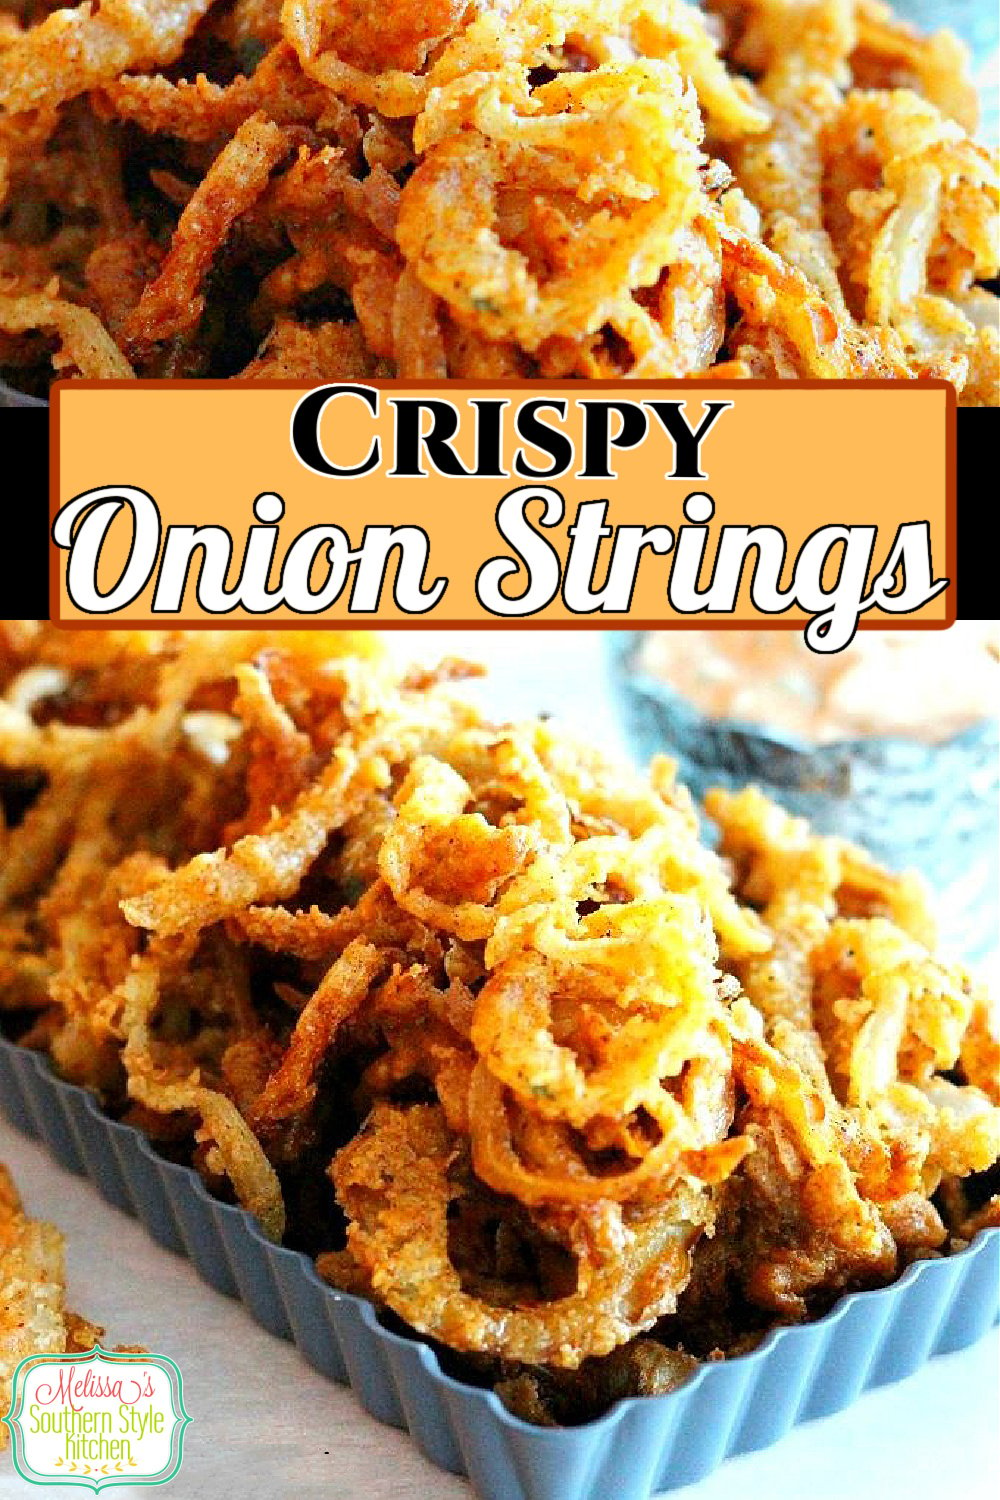 Enjoy these crispy onion strings as an appetizer, side dish or piled high on a salad or juicy burger #onionstrings #onionrings #crispyonionstrings #srirachasauce #dippingsauce #appeitzers #sidedishrecipes #onions #southernfood #southernrecipes via @melissasssk